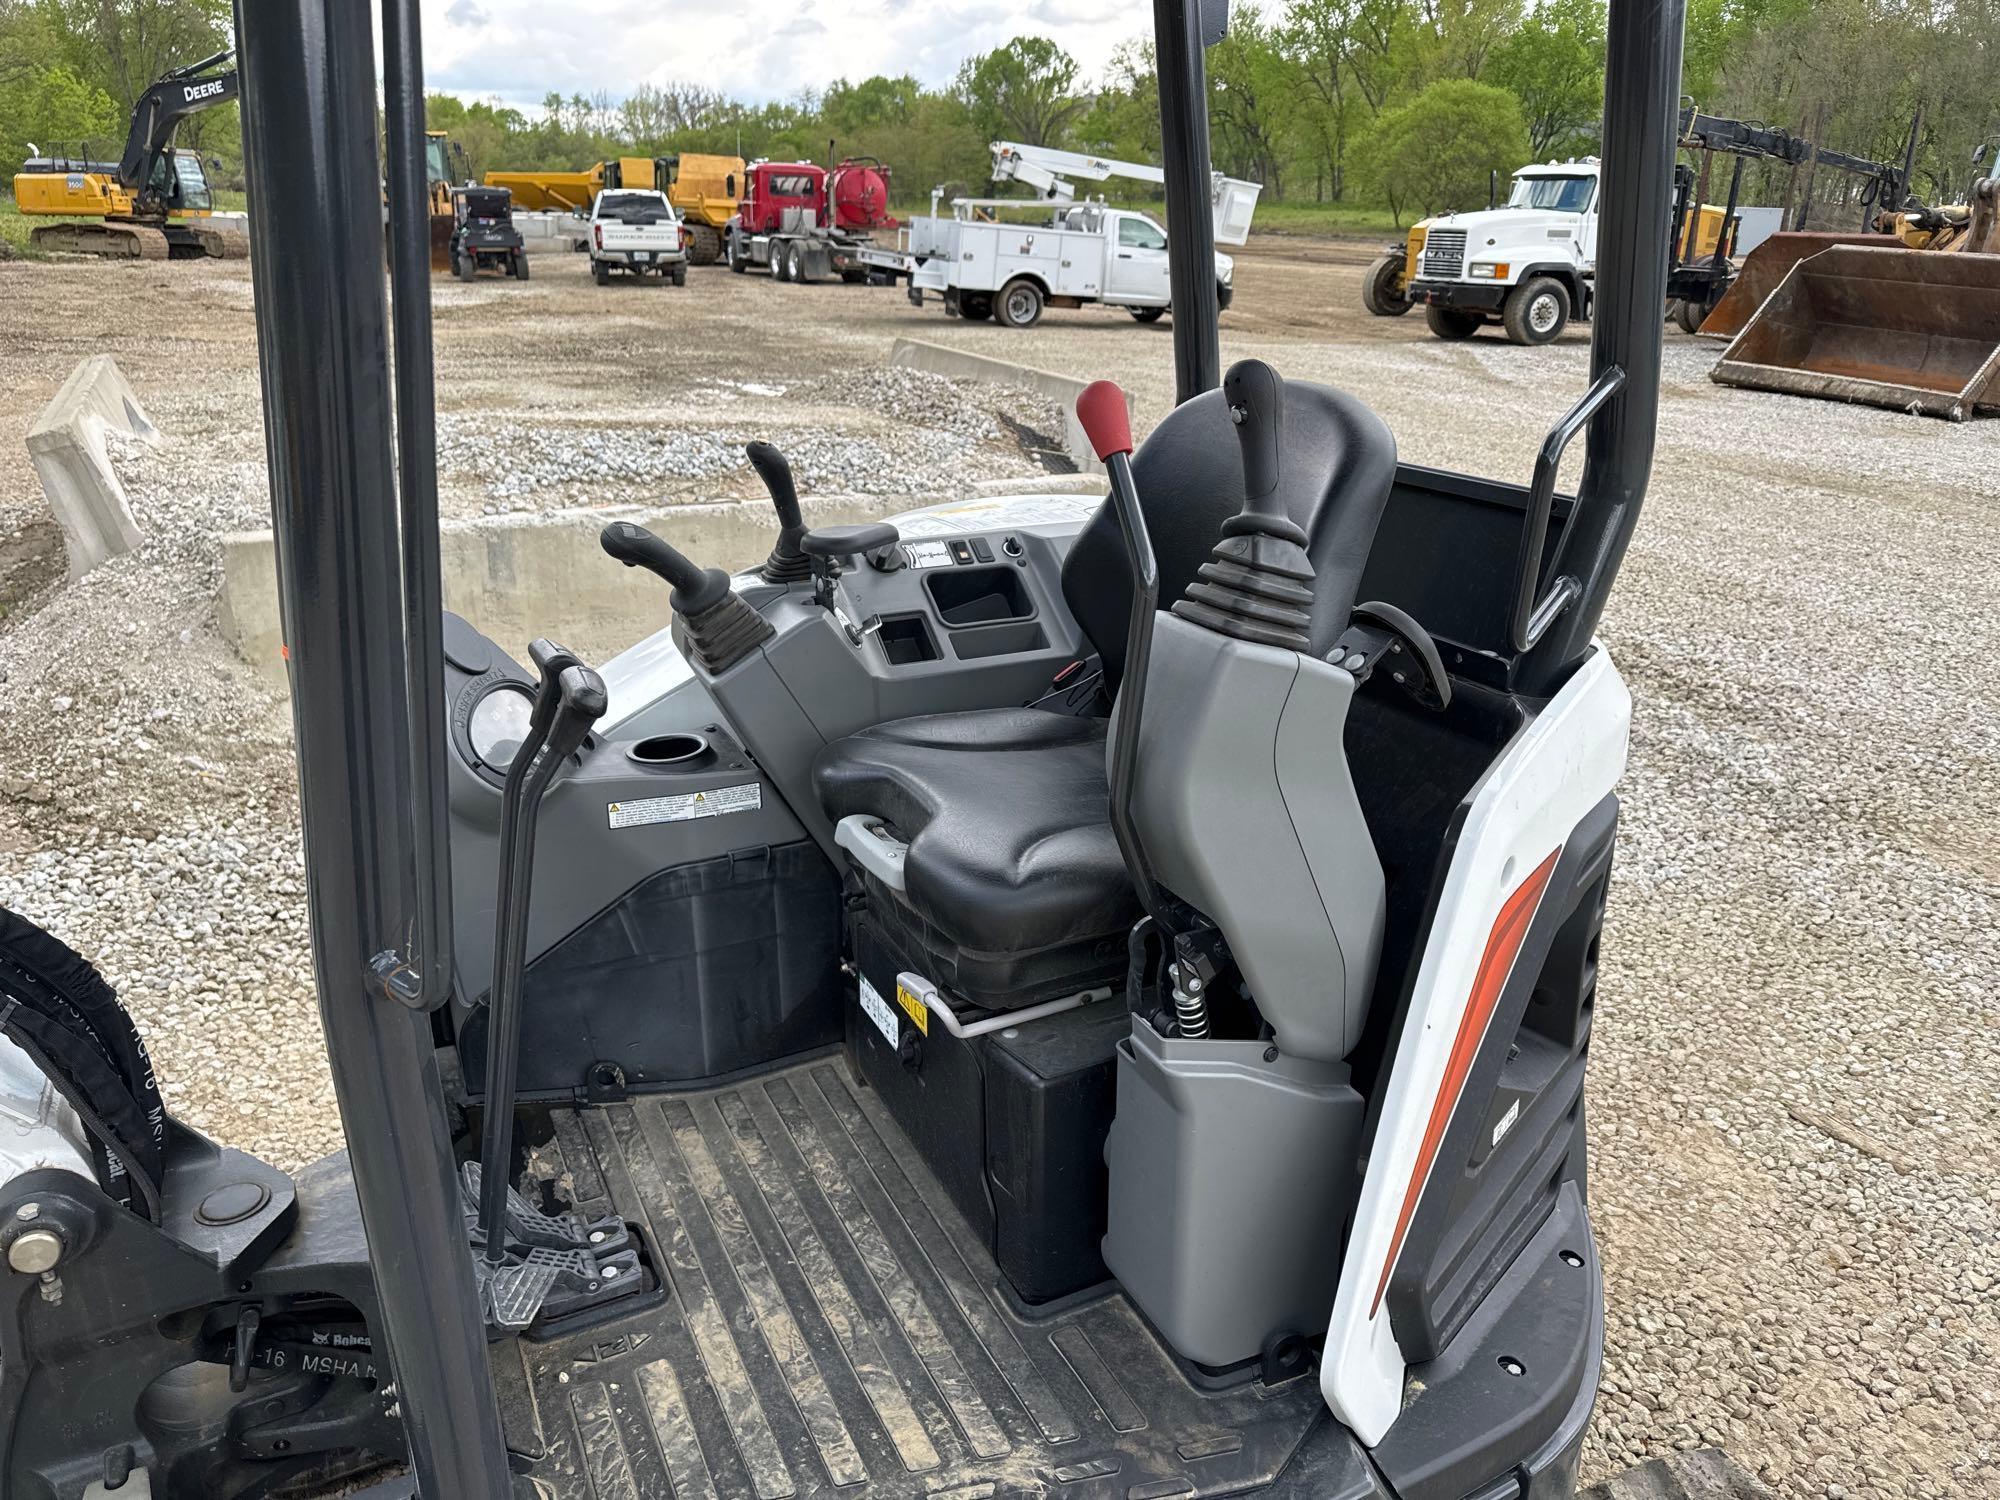 NEW UNUSED BOBCAT E35R2-SERIES HYDRAULIC EXCAVATOR SN-915365, powered by diesel engine, equipped